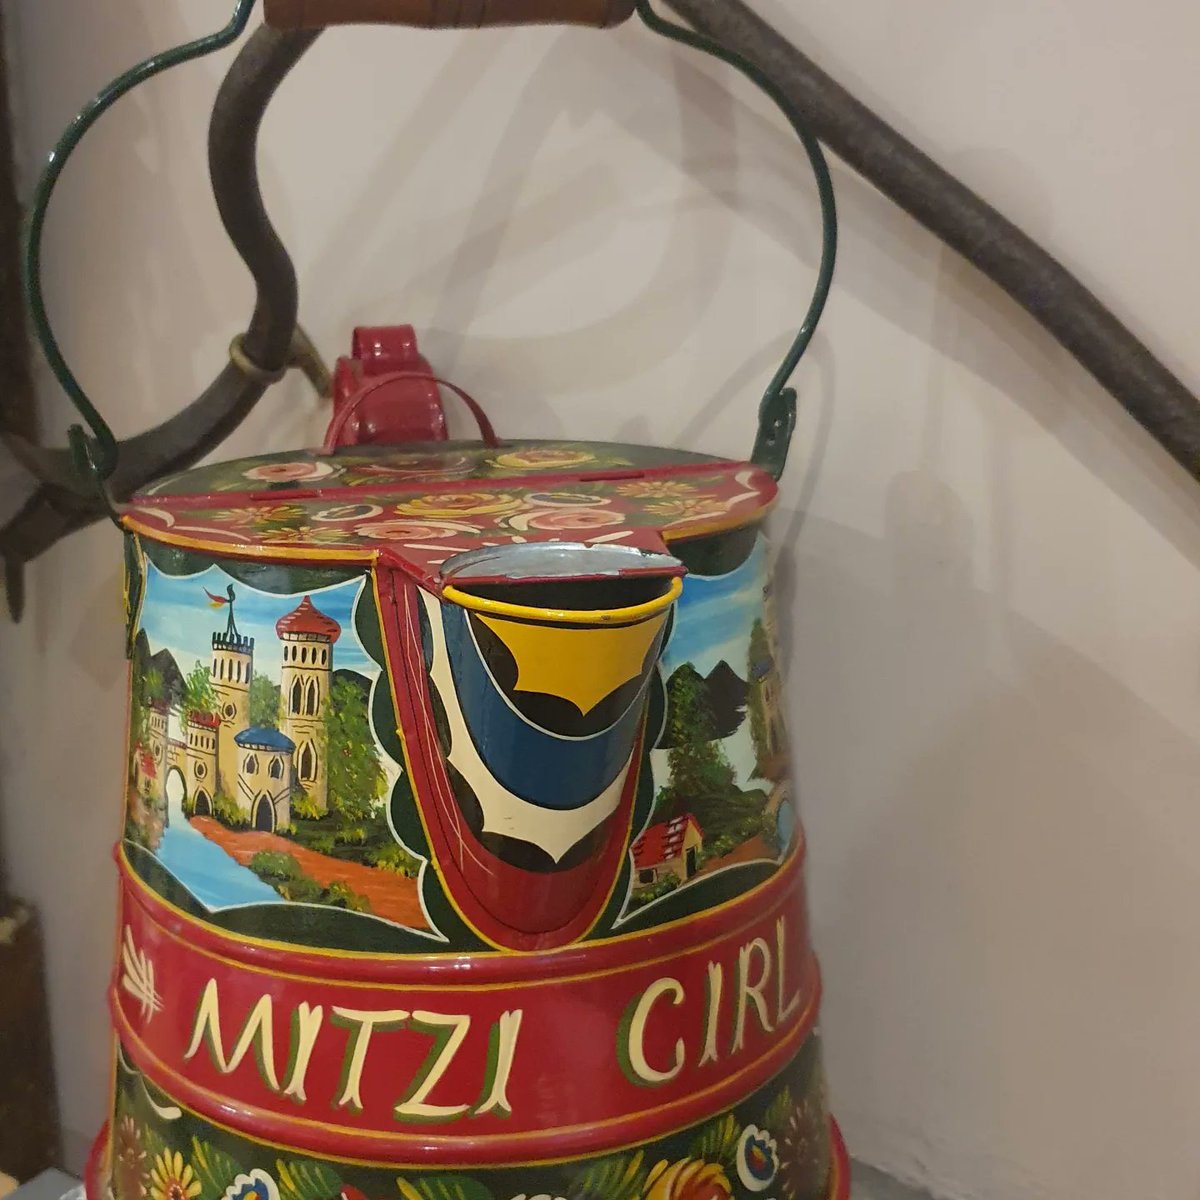 We would like to say a huge thank you to the family of Philip Moran who kindly donated this beautiful jug for our museum. Philip loved the canal & had a boat at Goytre. What a privilege to have this in our museum. #fourteenlocks #mbact #museum #canal